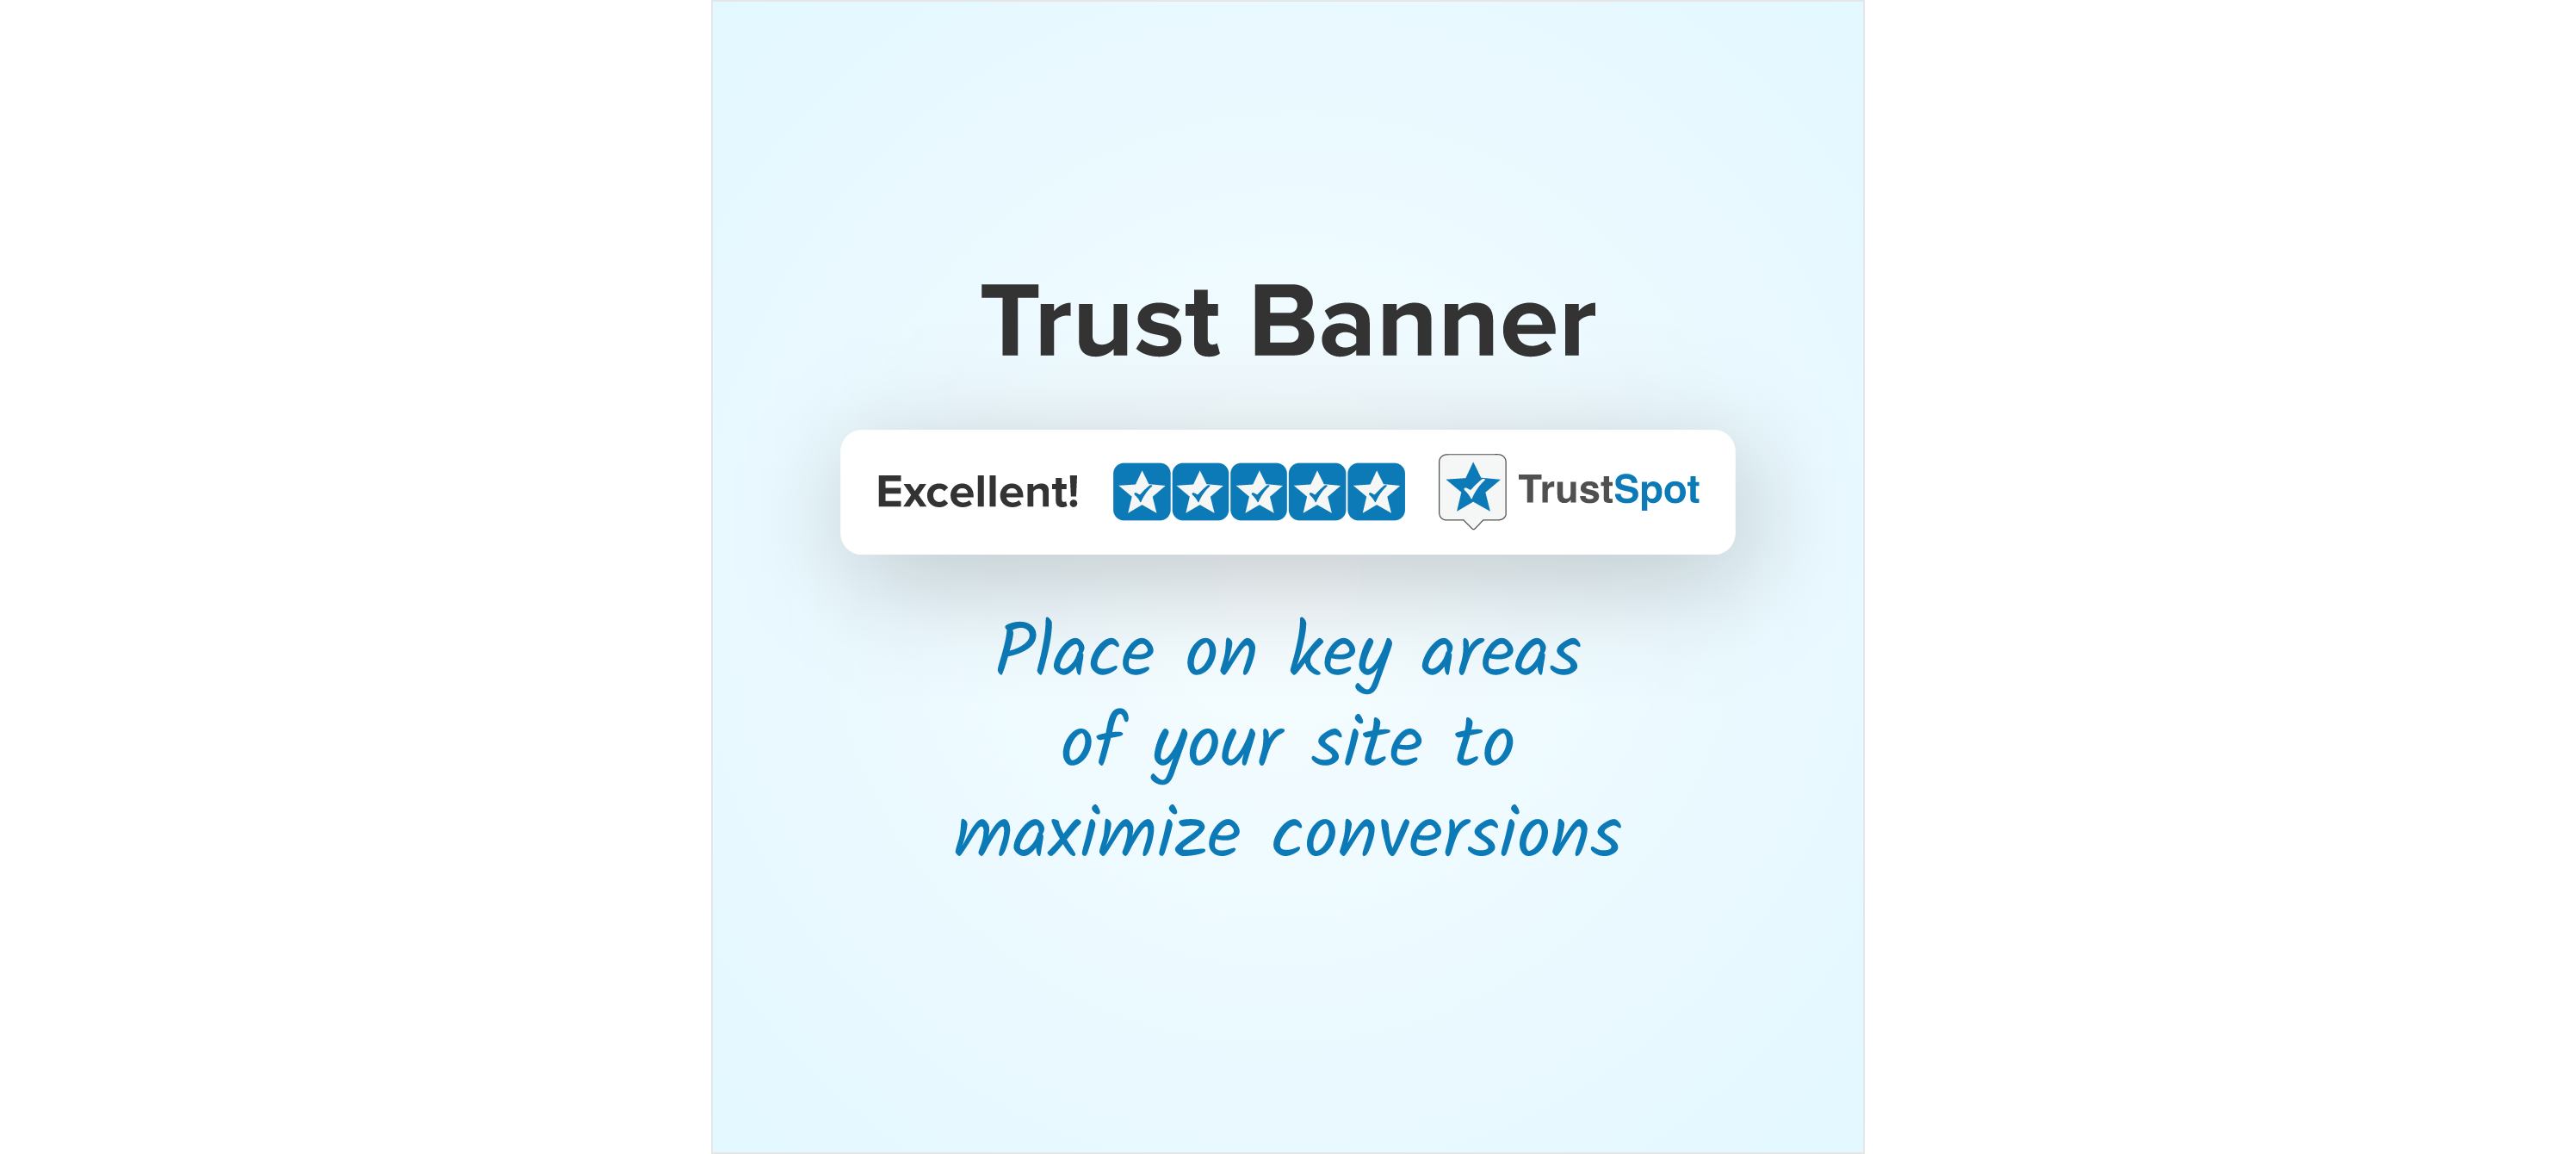 Place on key areas of your site to maximize conversions.